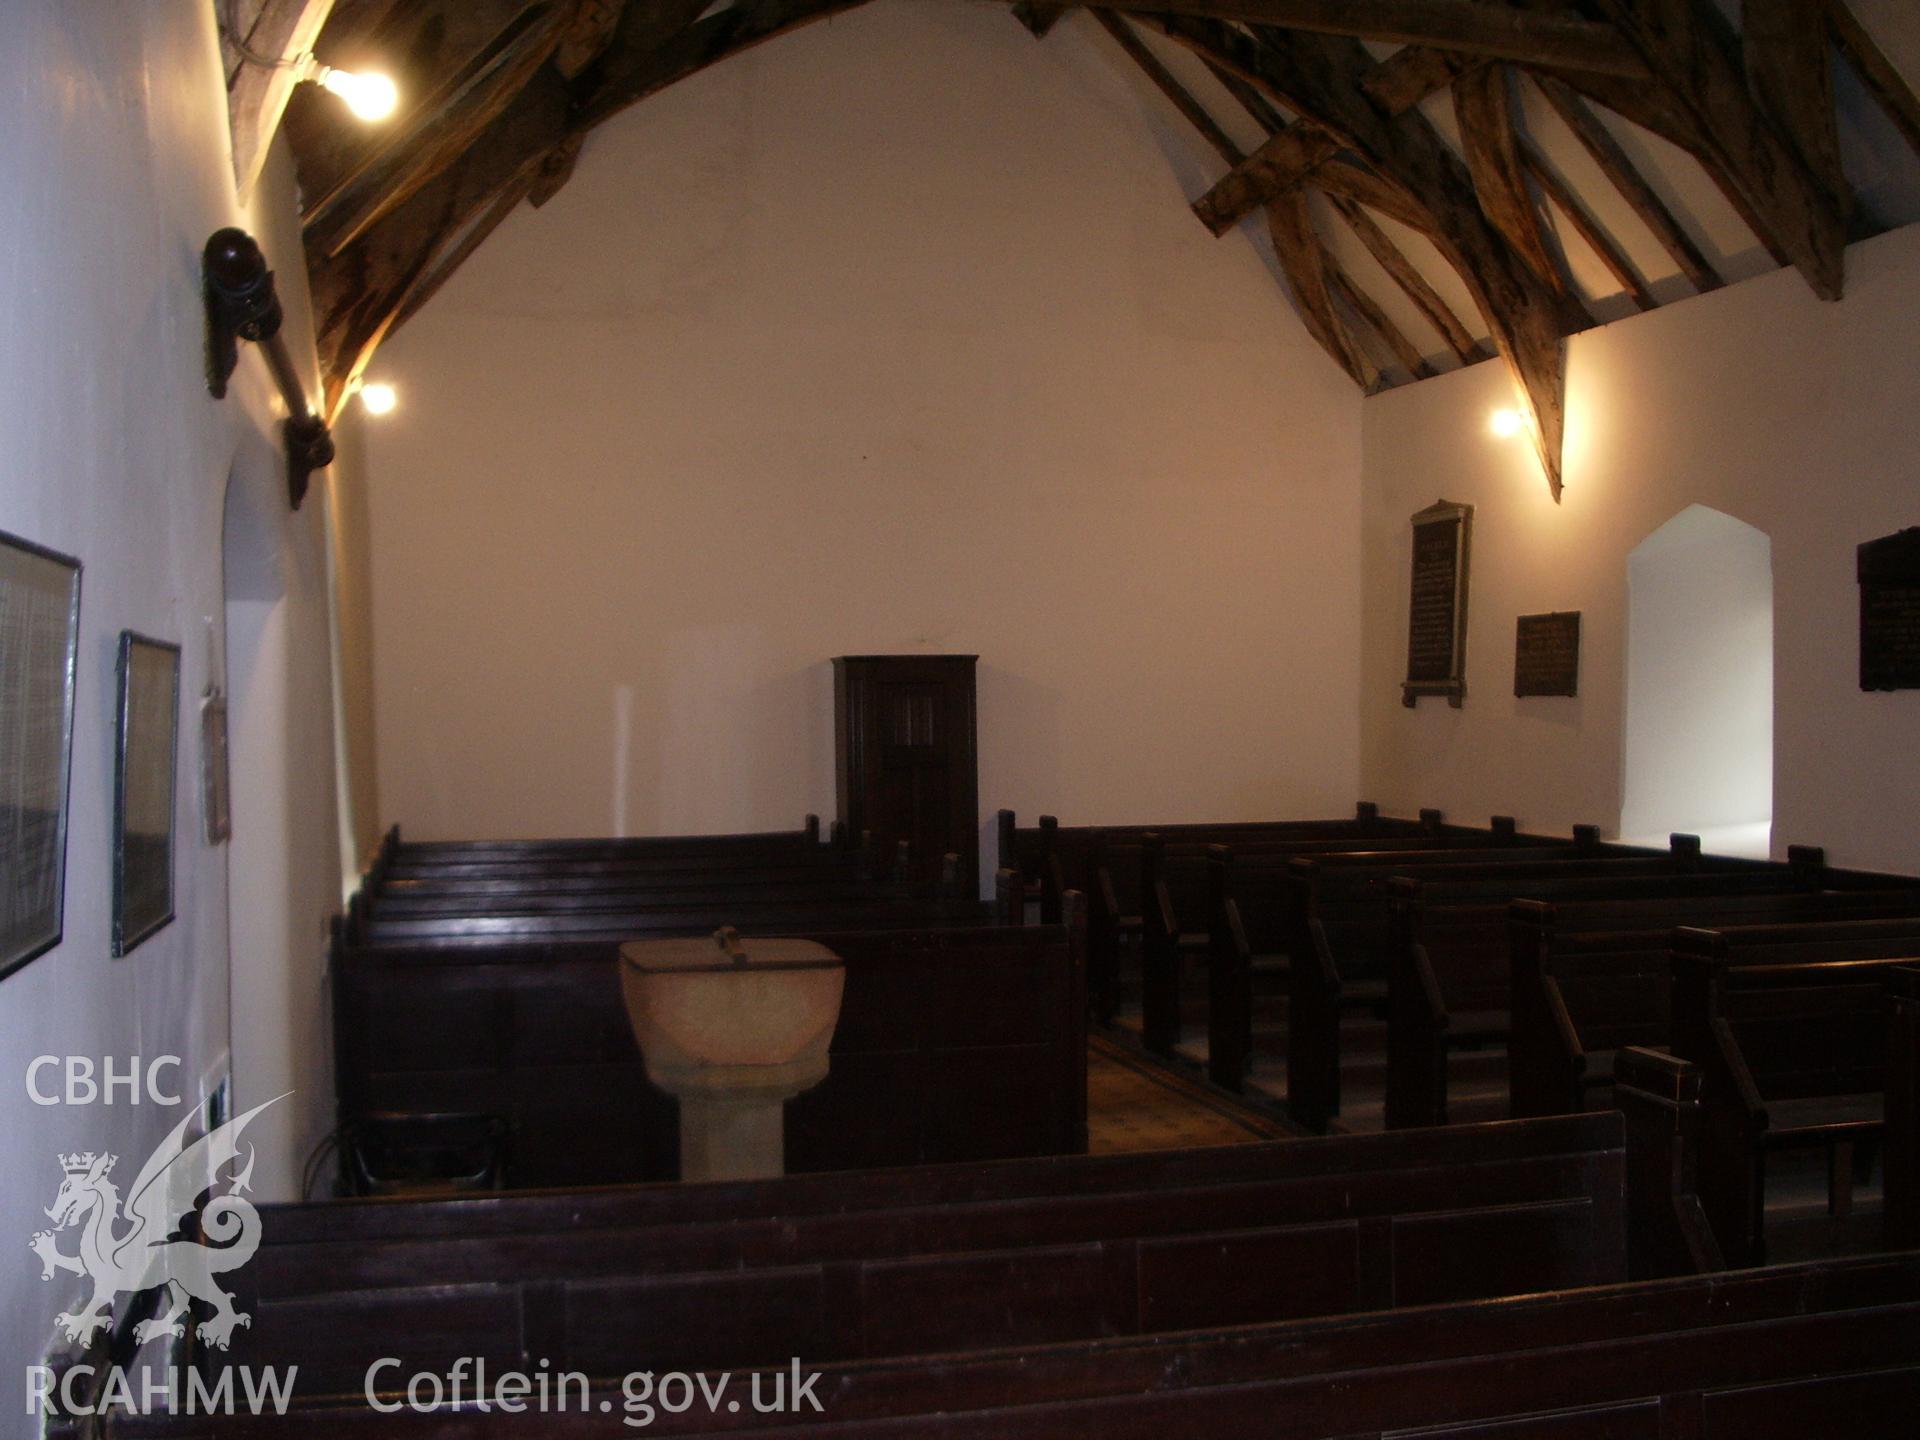 Interior view of the church looking west, showing the pews and the font.